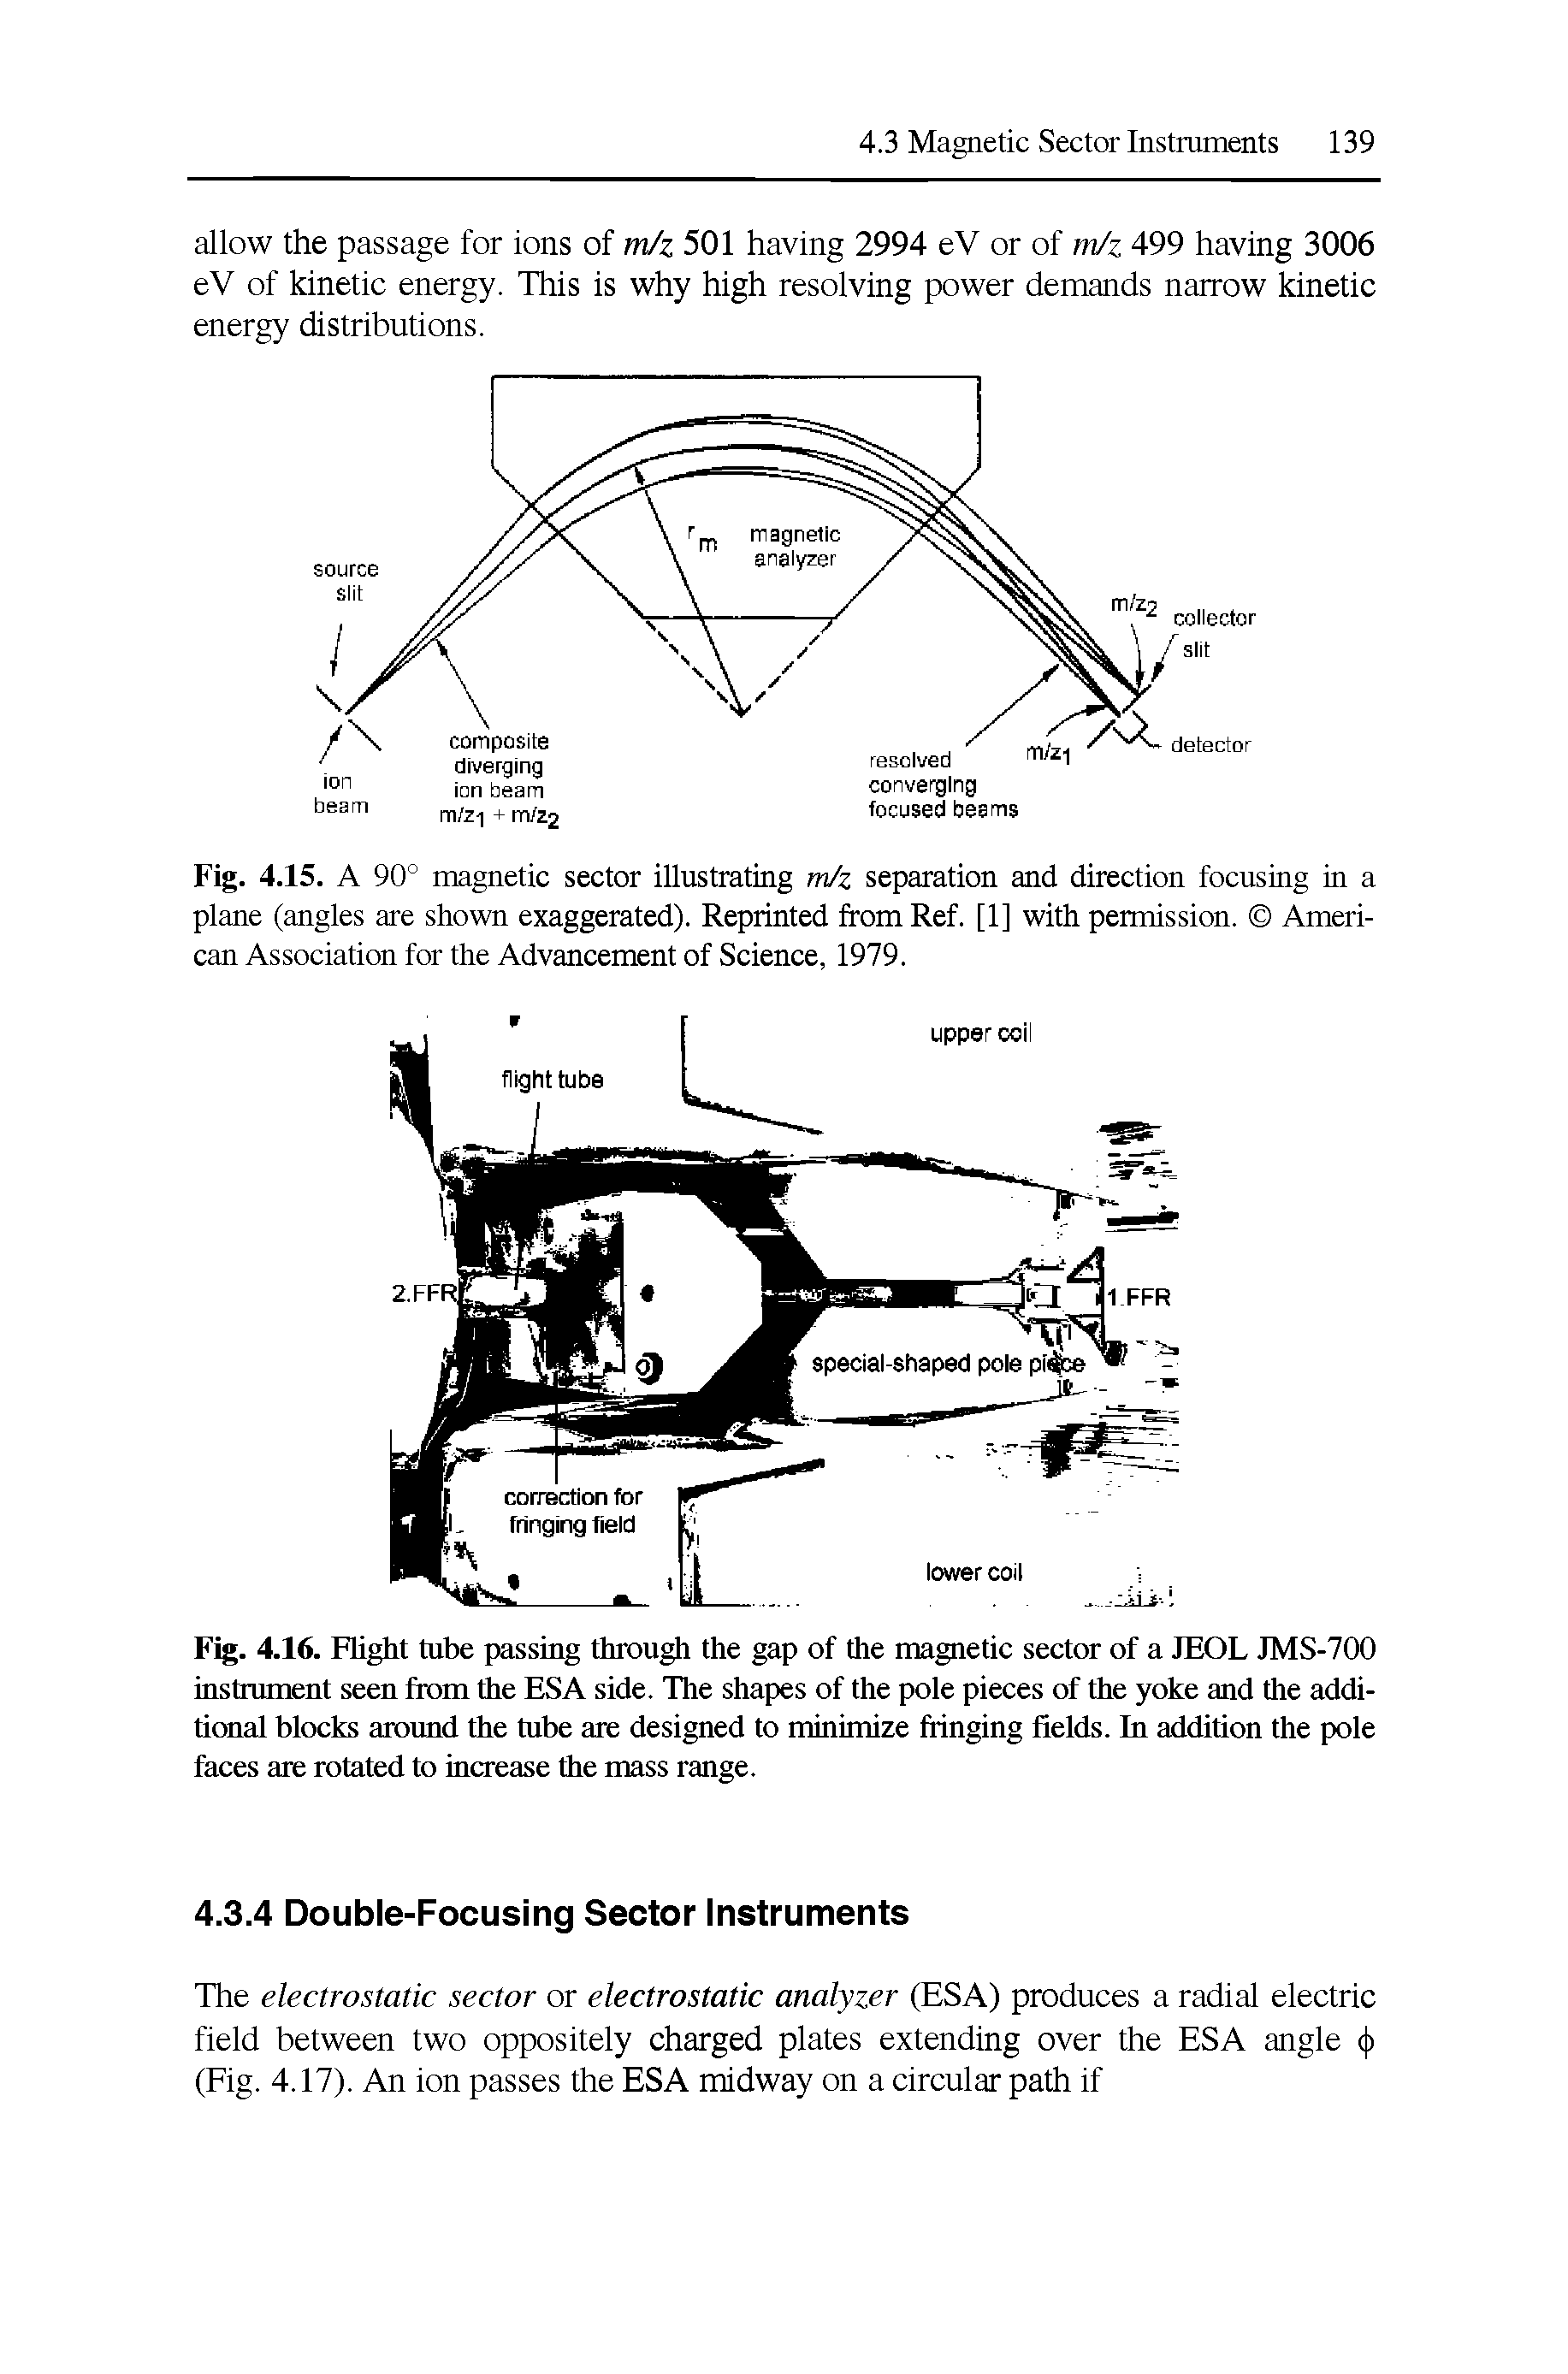 Fig. 4.15. A 90° magnetic sector illustrating m/z separation and direction focusing in a plane (angles are shown exaggerated). Reprinted from Ref. [1] with permission. American Association for the Advancement of Science, 1979.